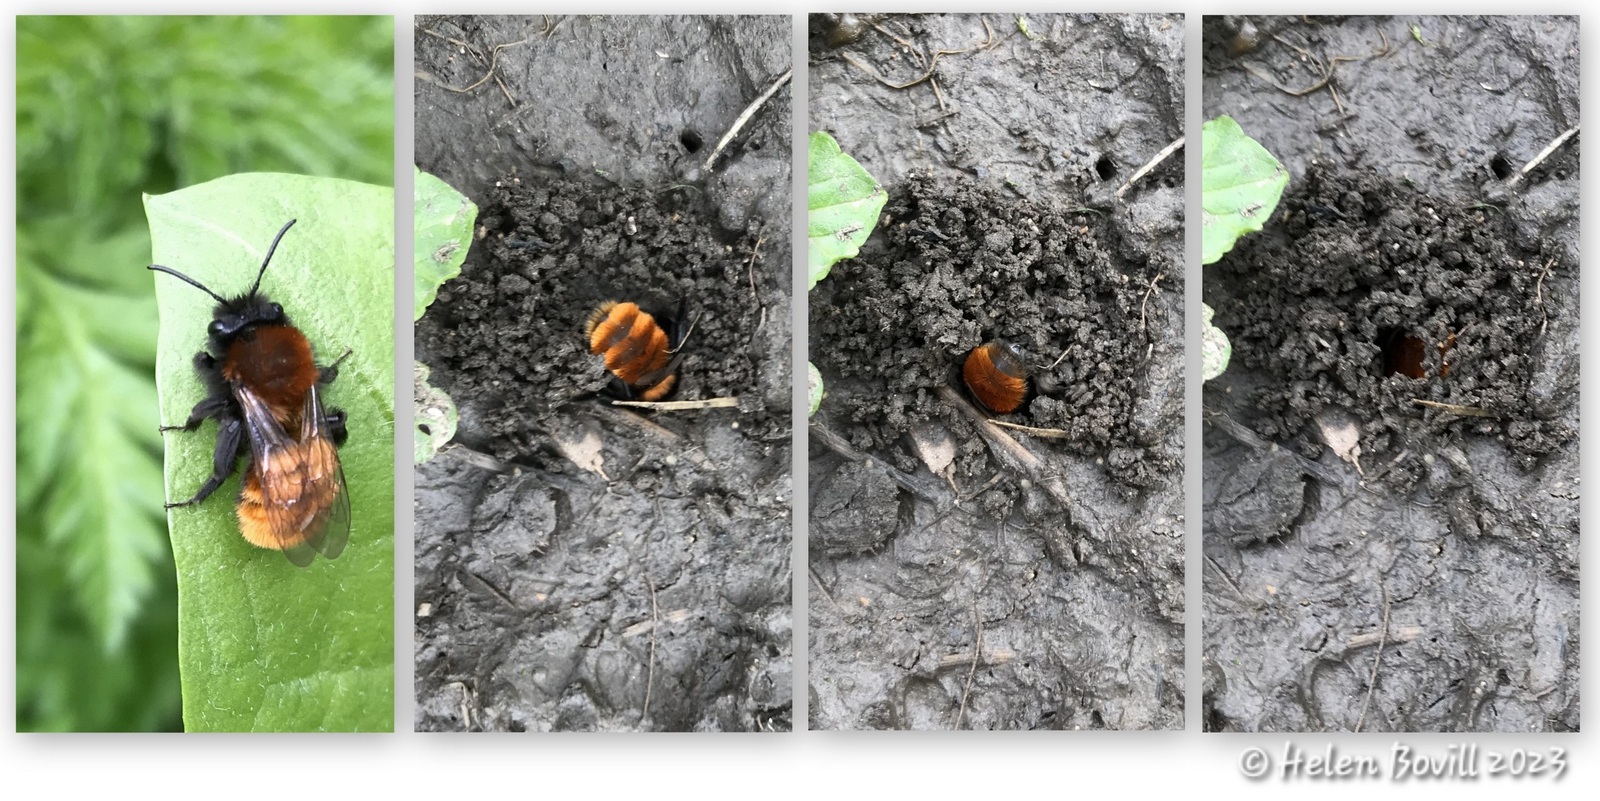 A tawny Mining Bee on a leaf, and a set of photos showing the bee making its burrow in the ground in the cemetery